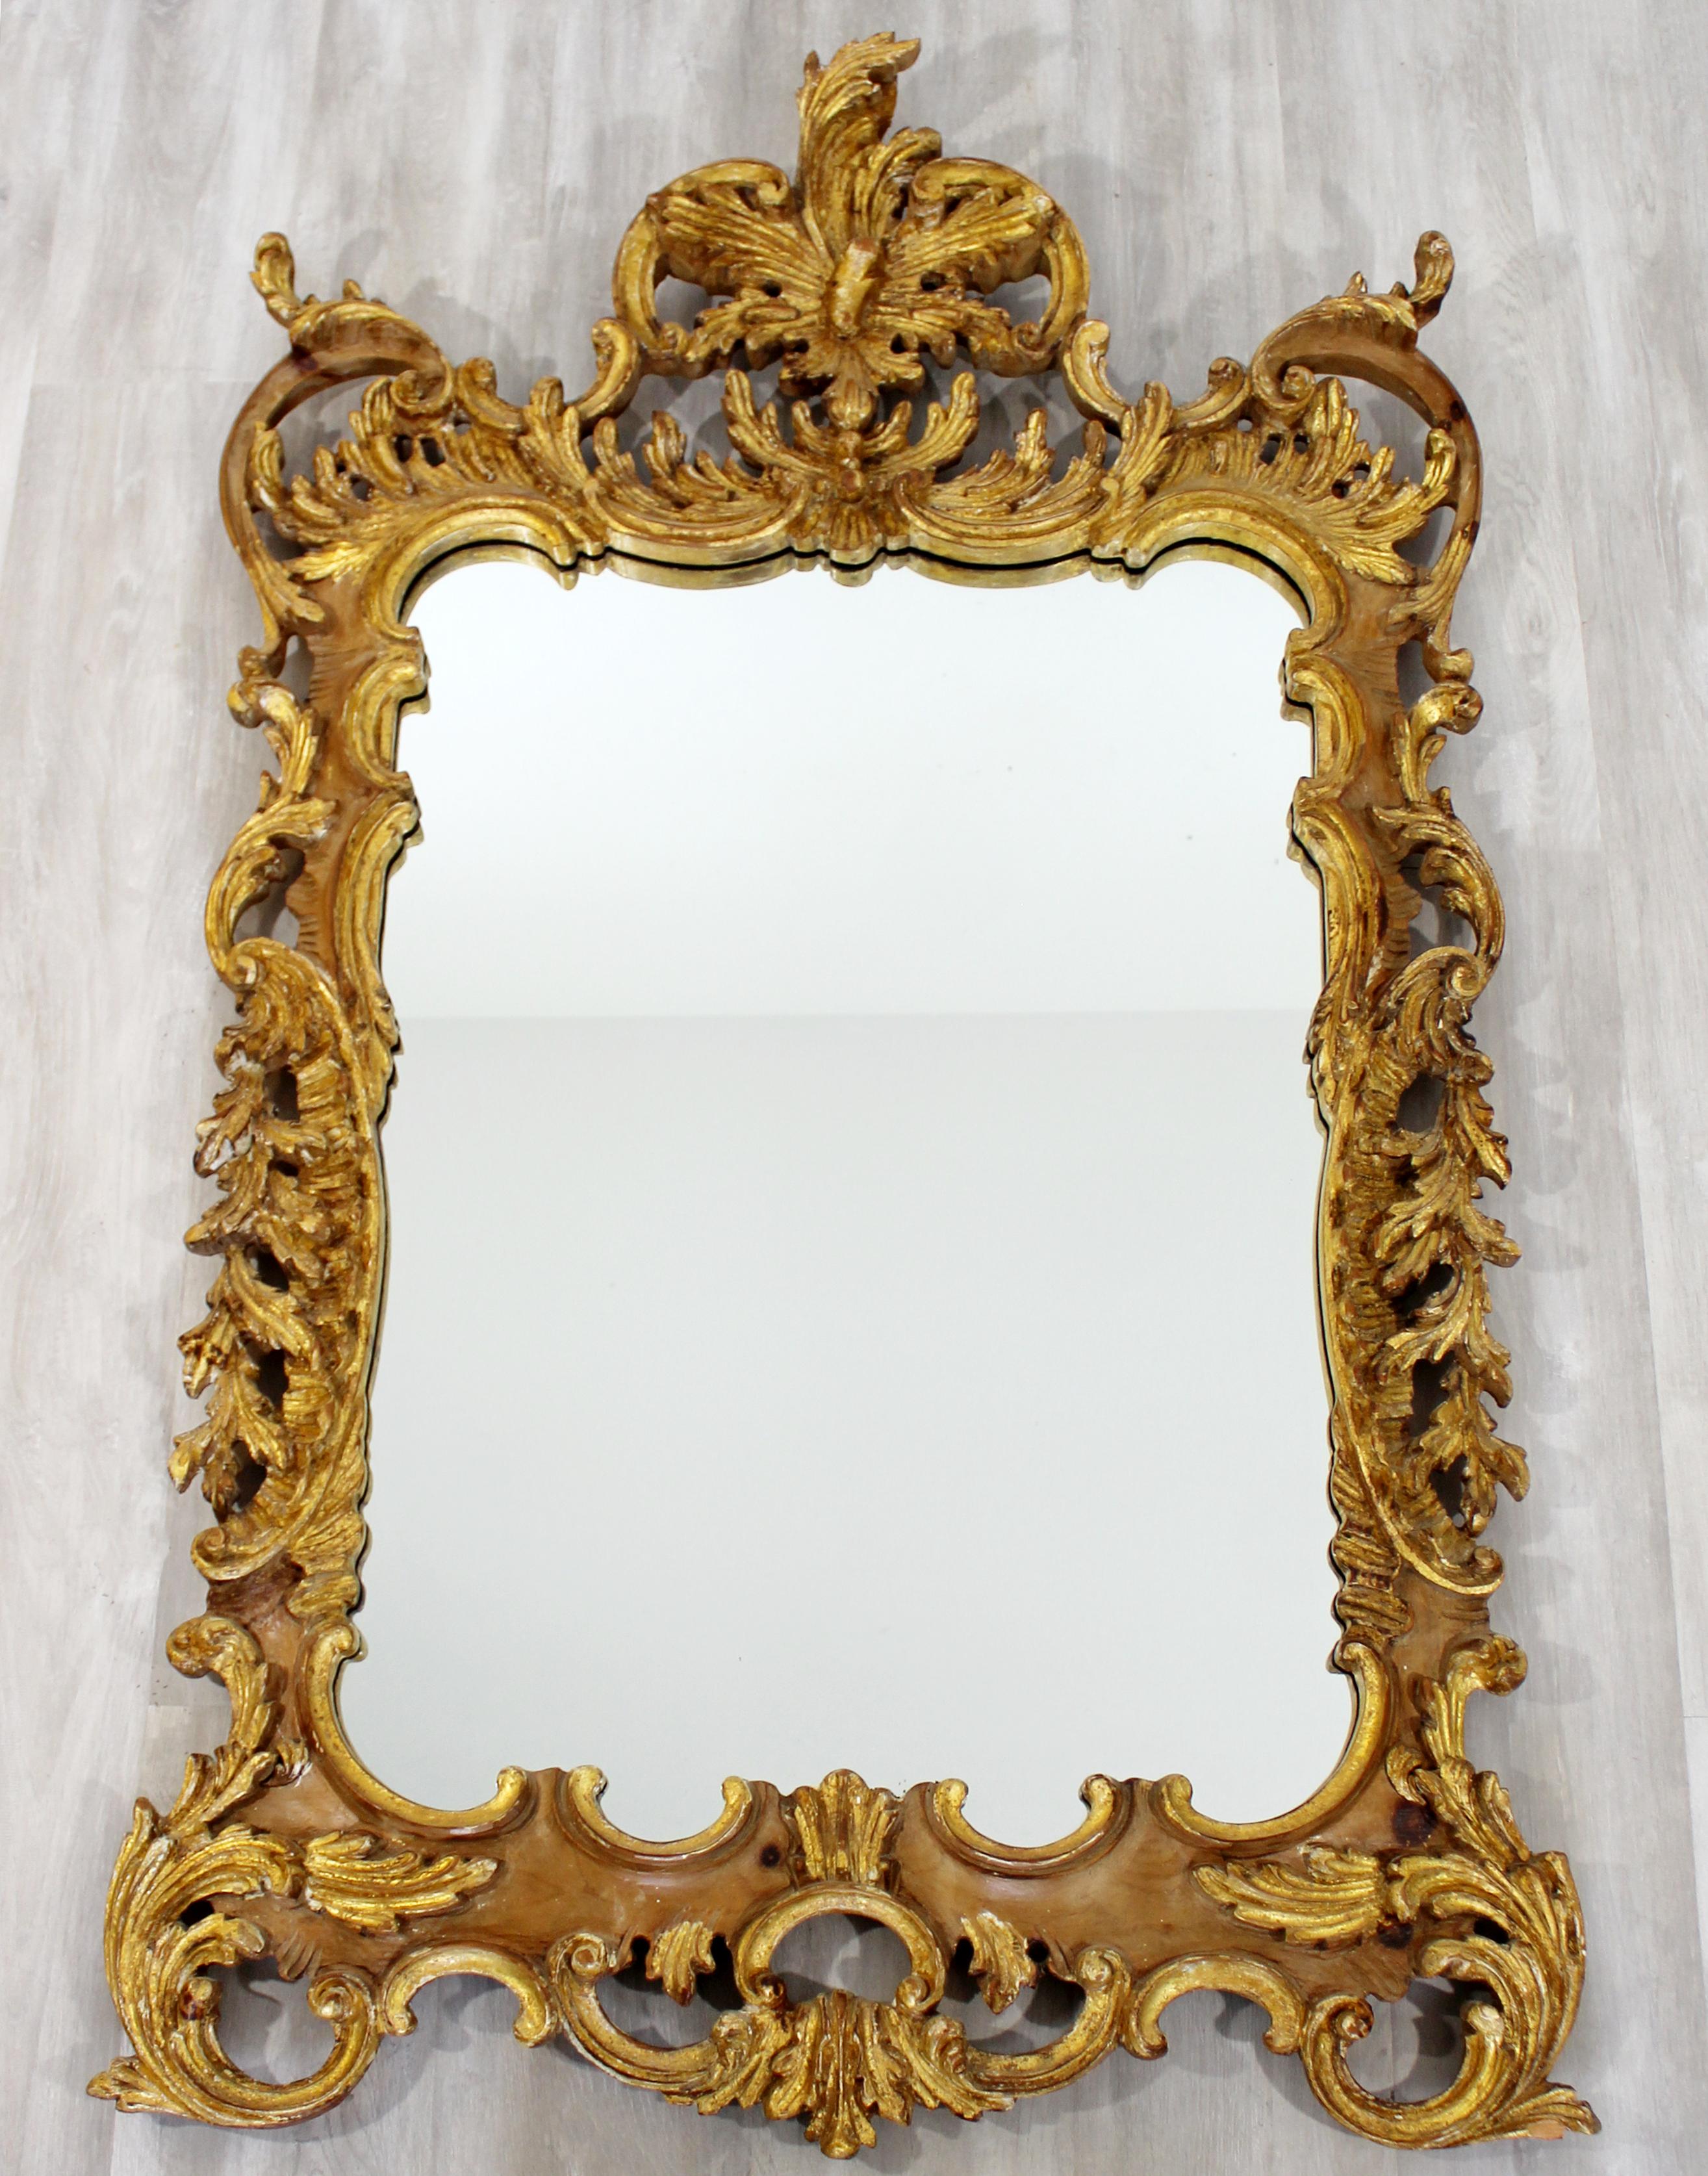 For your consideration is a marvelous, Rococo style, gold gilt hanging wall mirror, by La Barge, circa 1970s. In excellent condition. The dimensions are 43.5